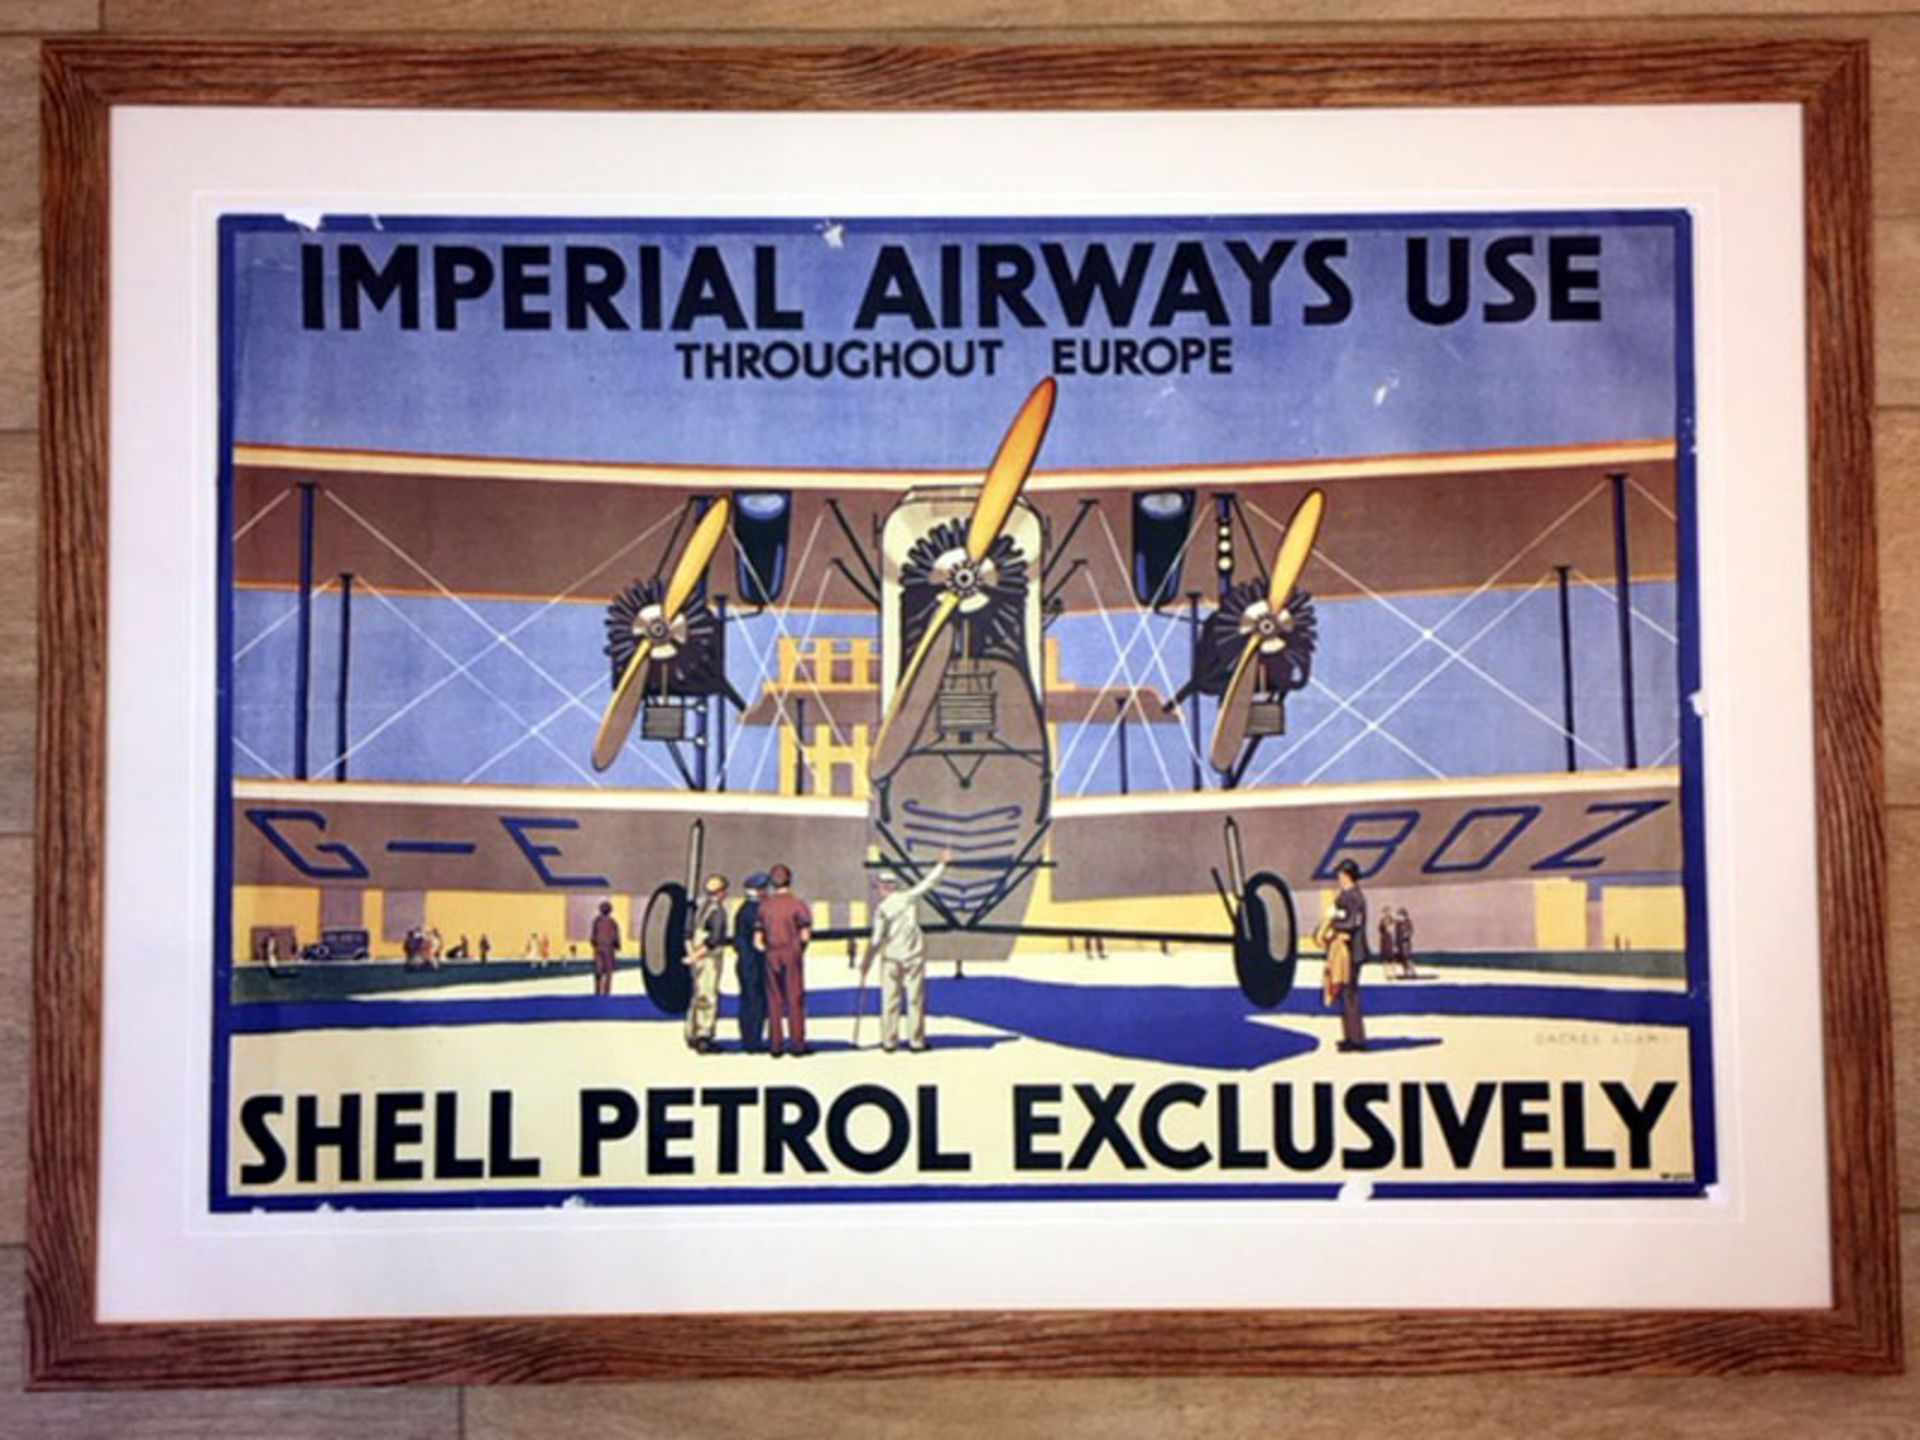 A Rare Shell Petrol Advertising Poster